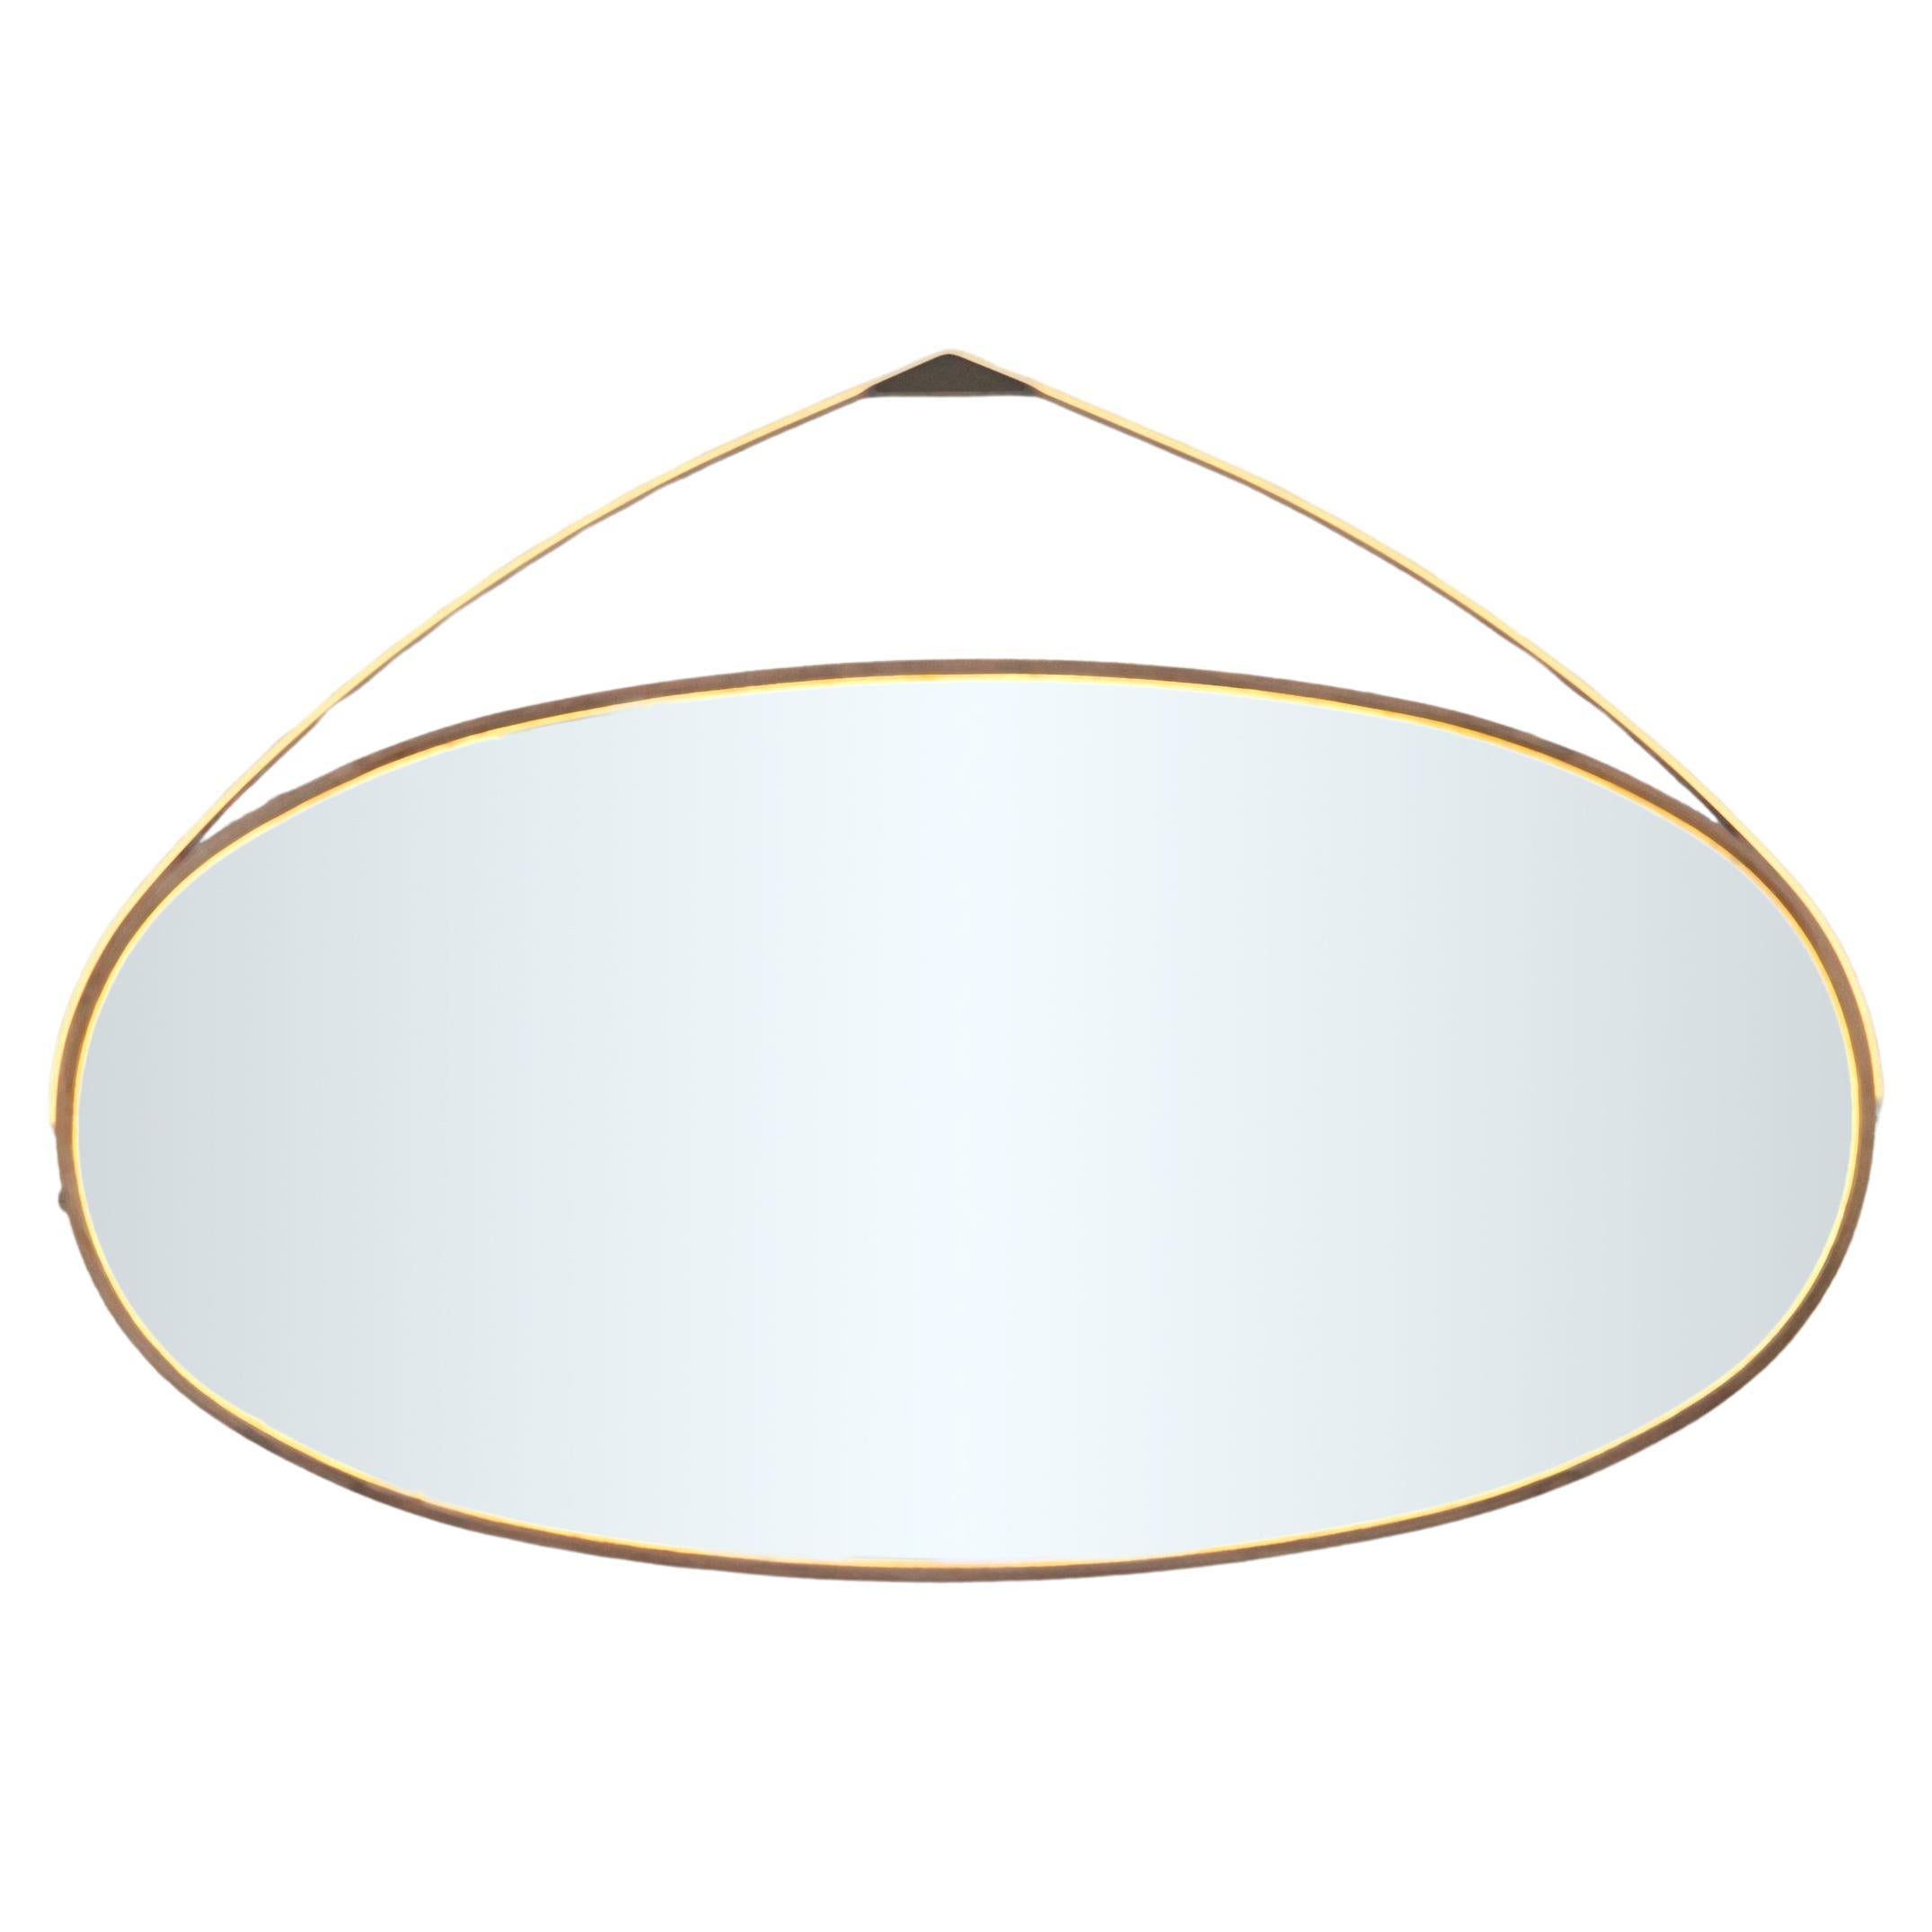 Gotham Oval Mirror Large, Customizable Wood and Metal